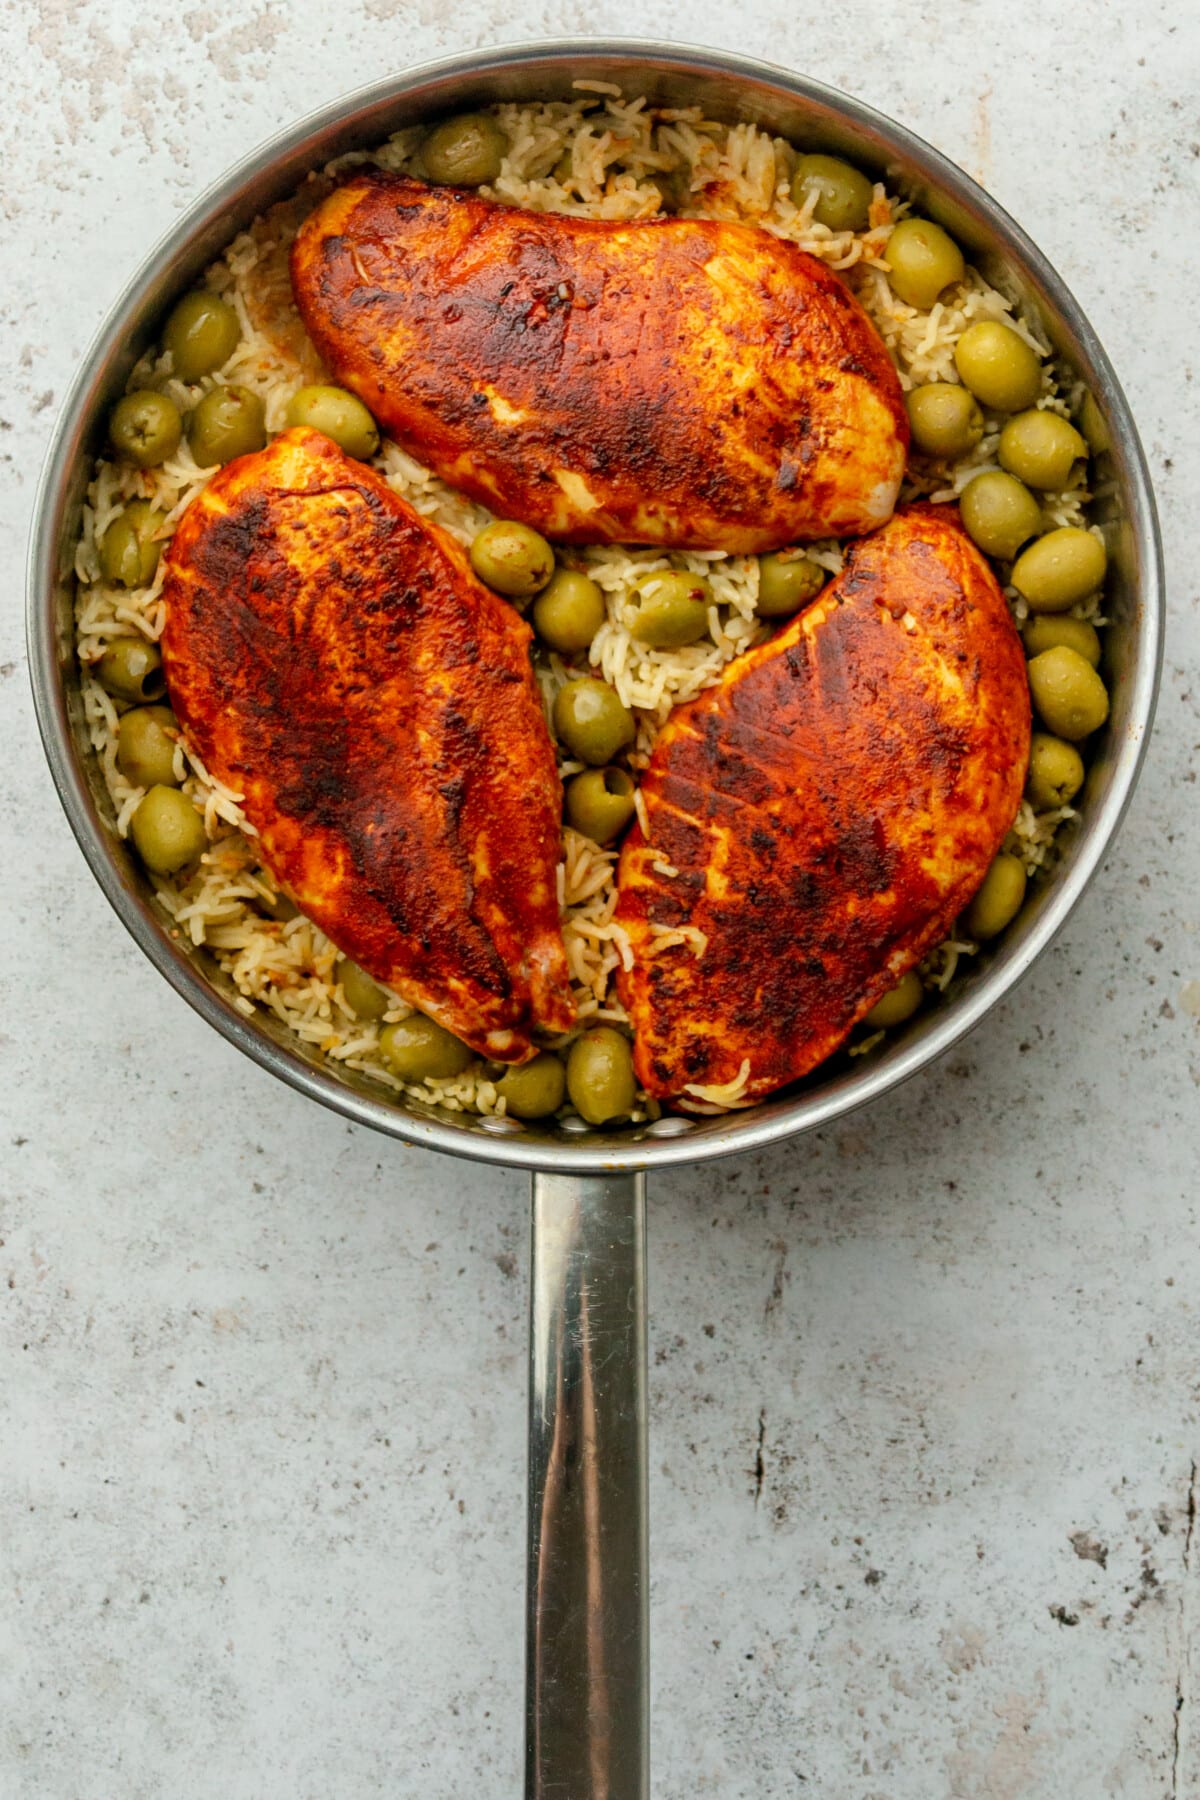 Spiced cooked chicken breasts and green olives sit on top of rice in a stainless steel frying pan on a light grey surface.